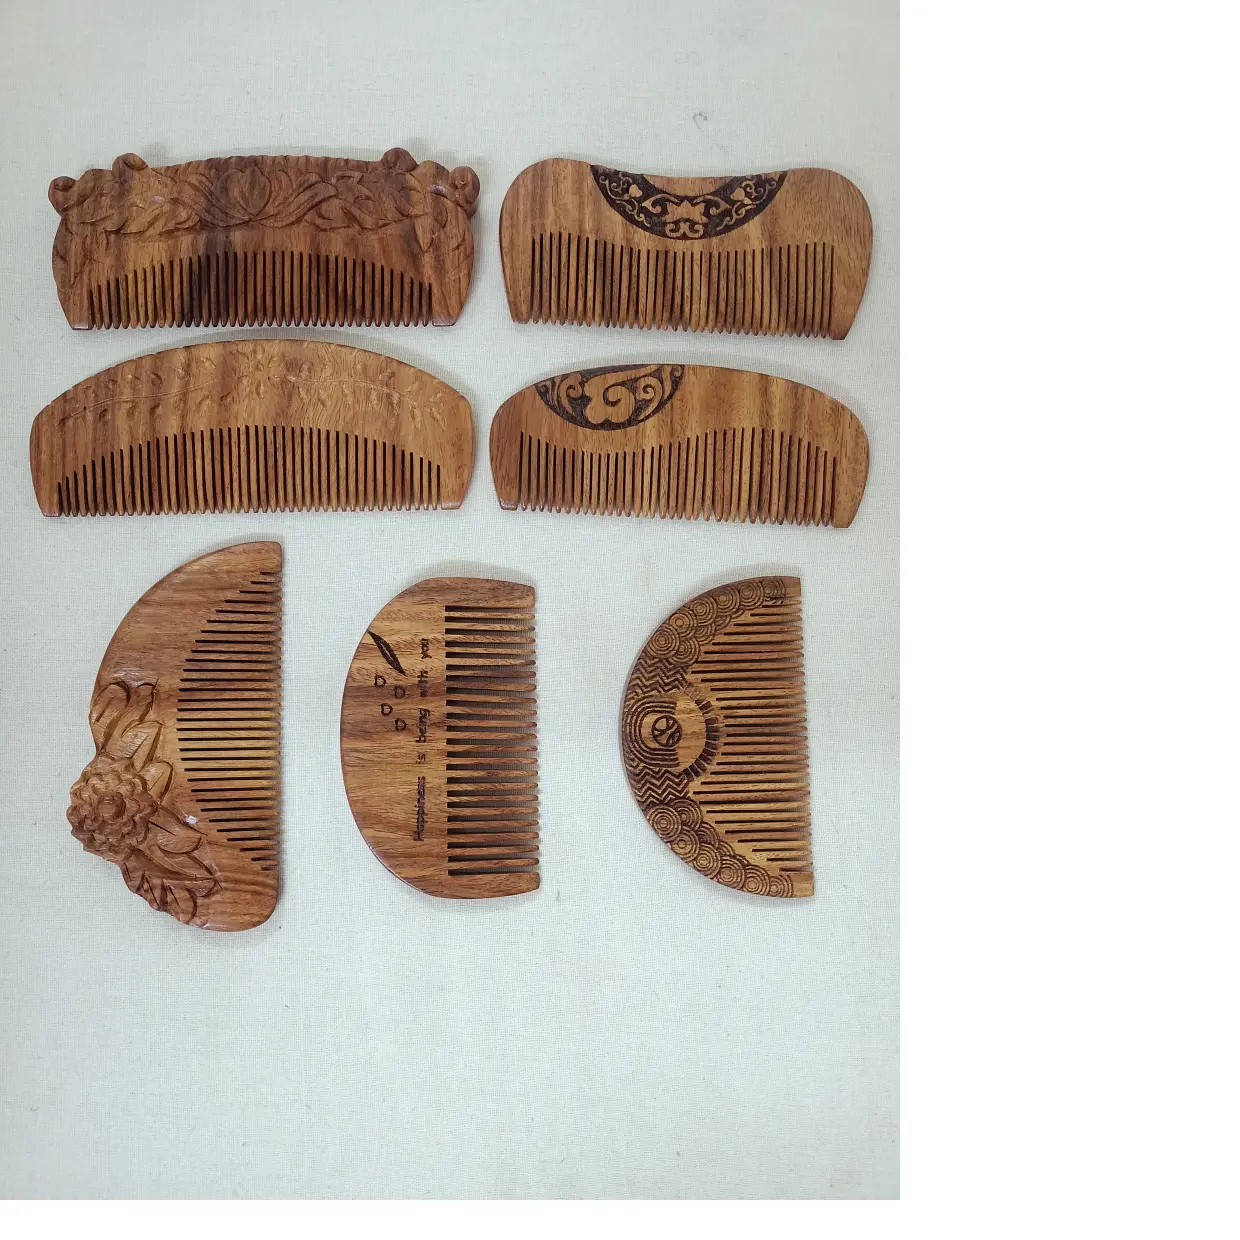 custom made engraved wooden combs in an assortment of sizes and shapes with unique engraved designs ideal for resale